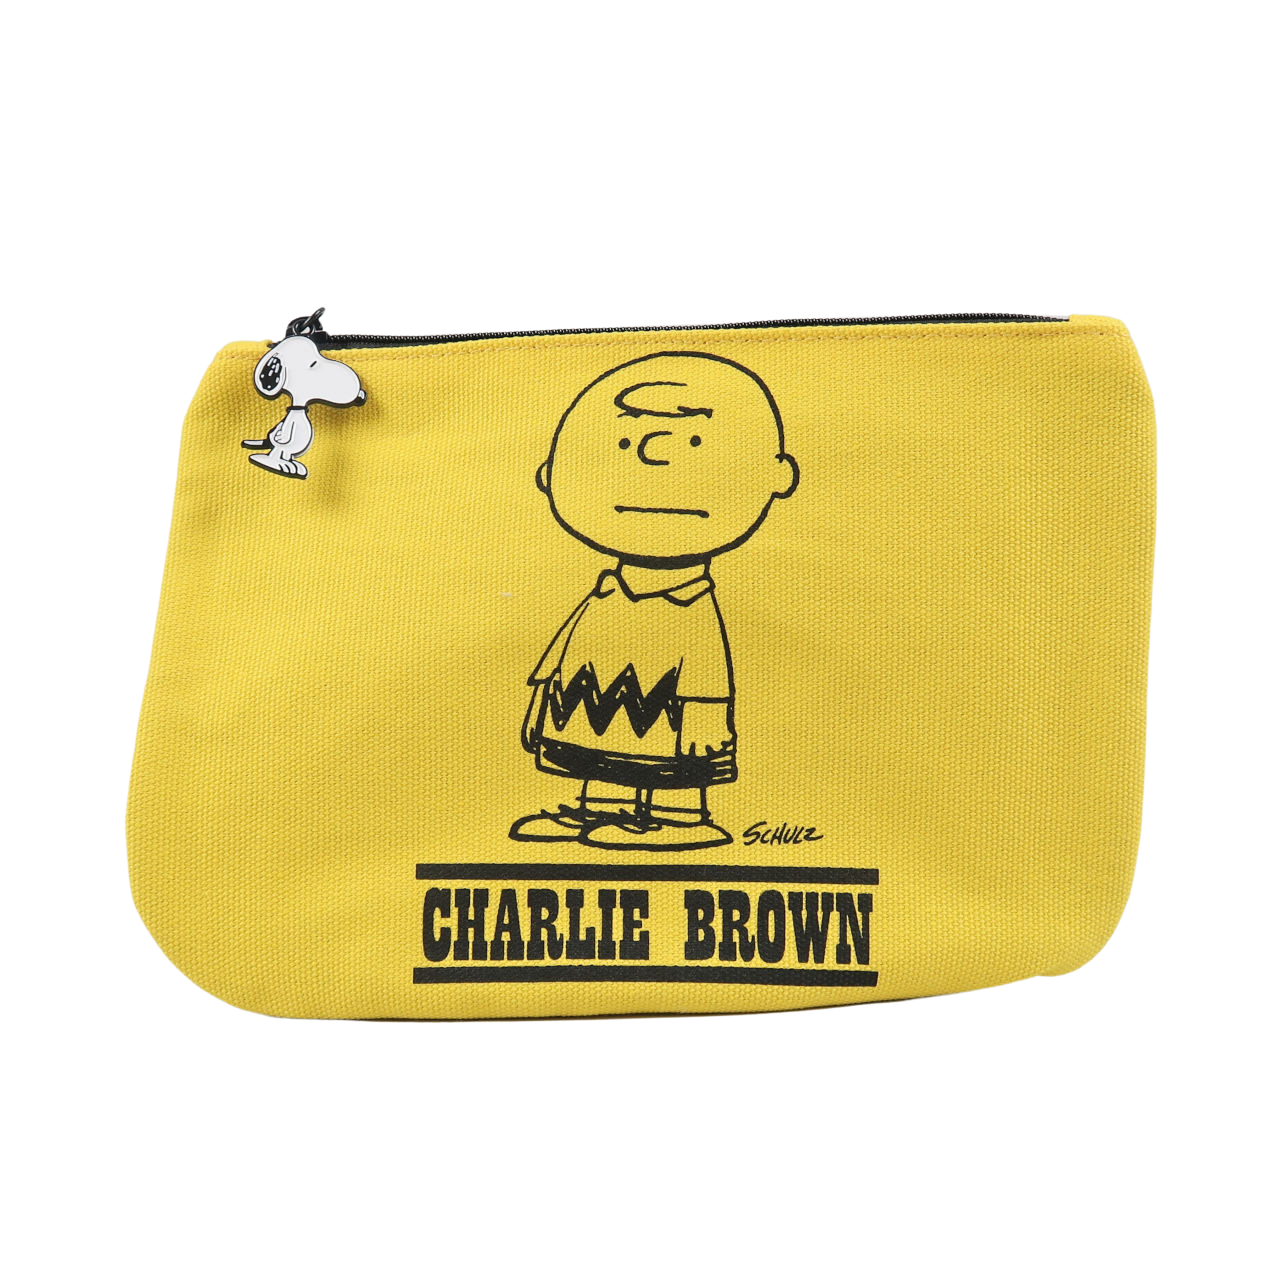 Peanuts Charlie Brown Pouch